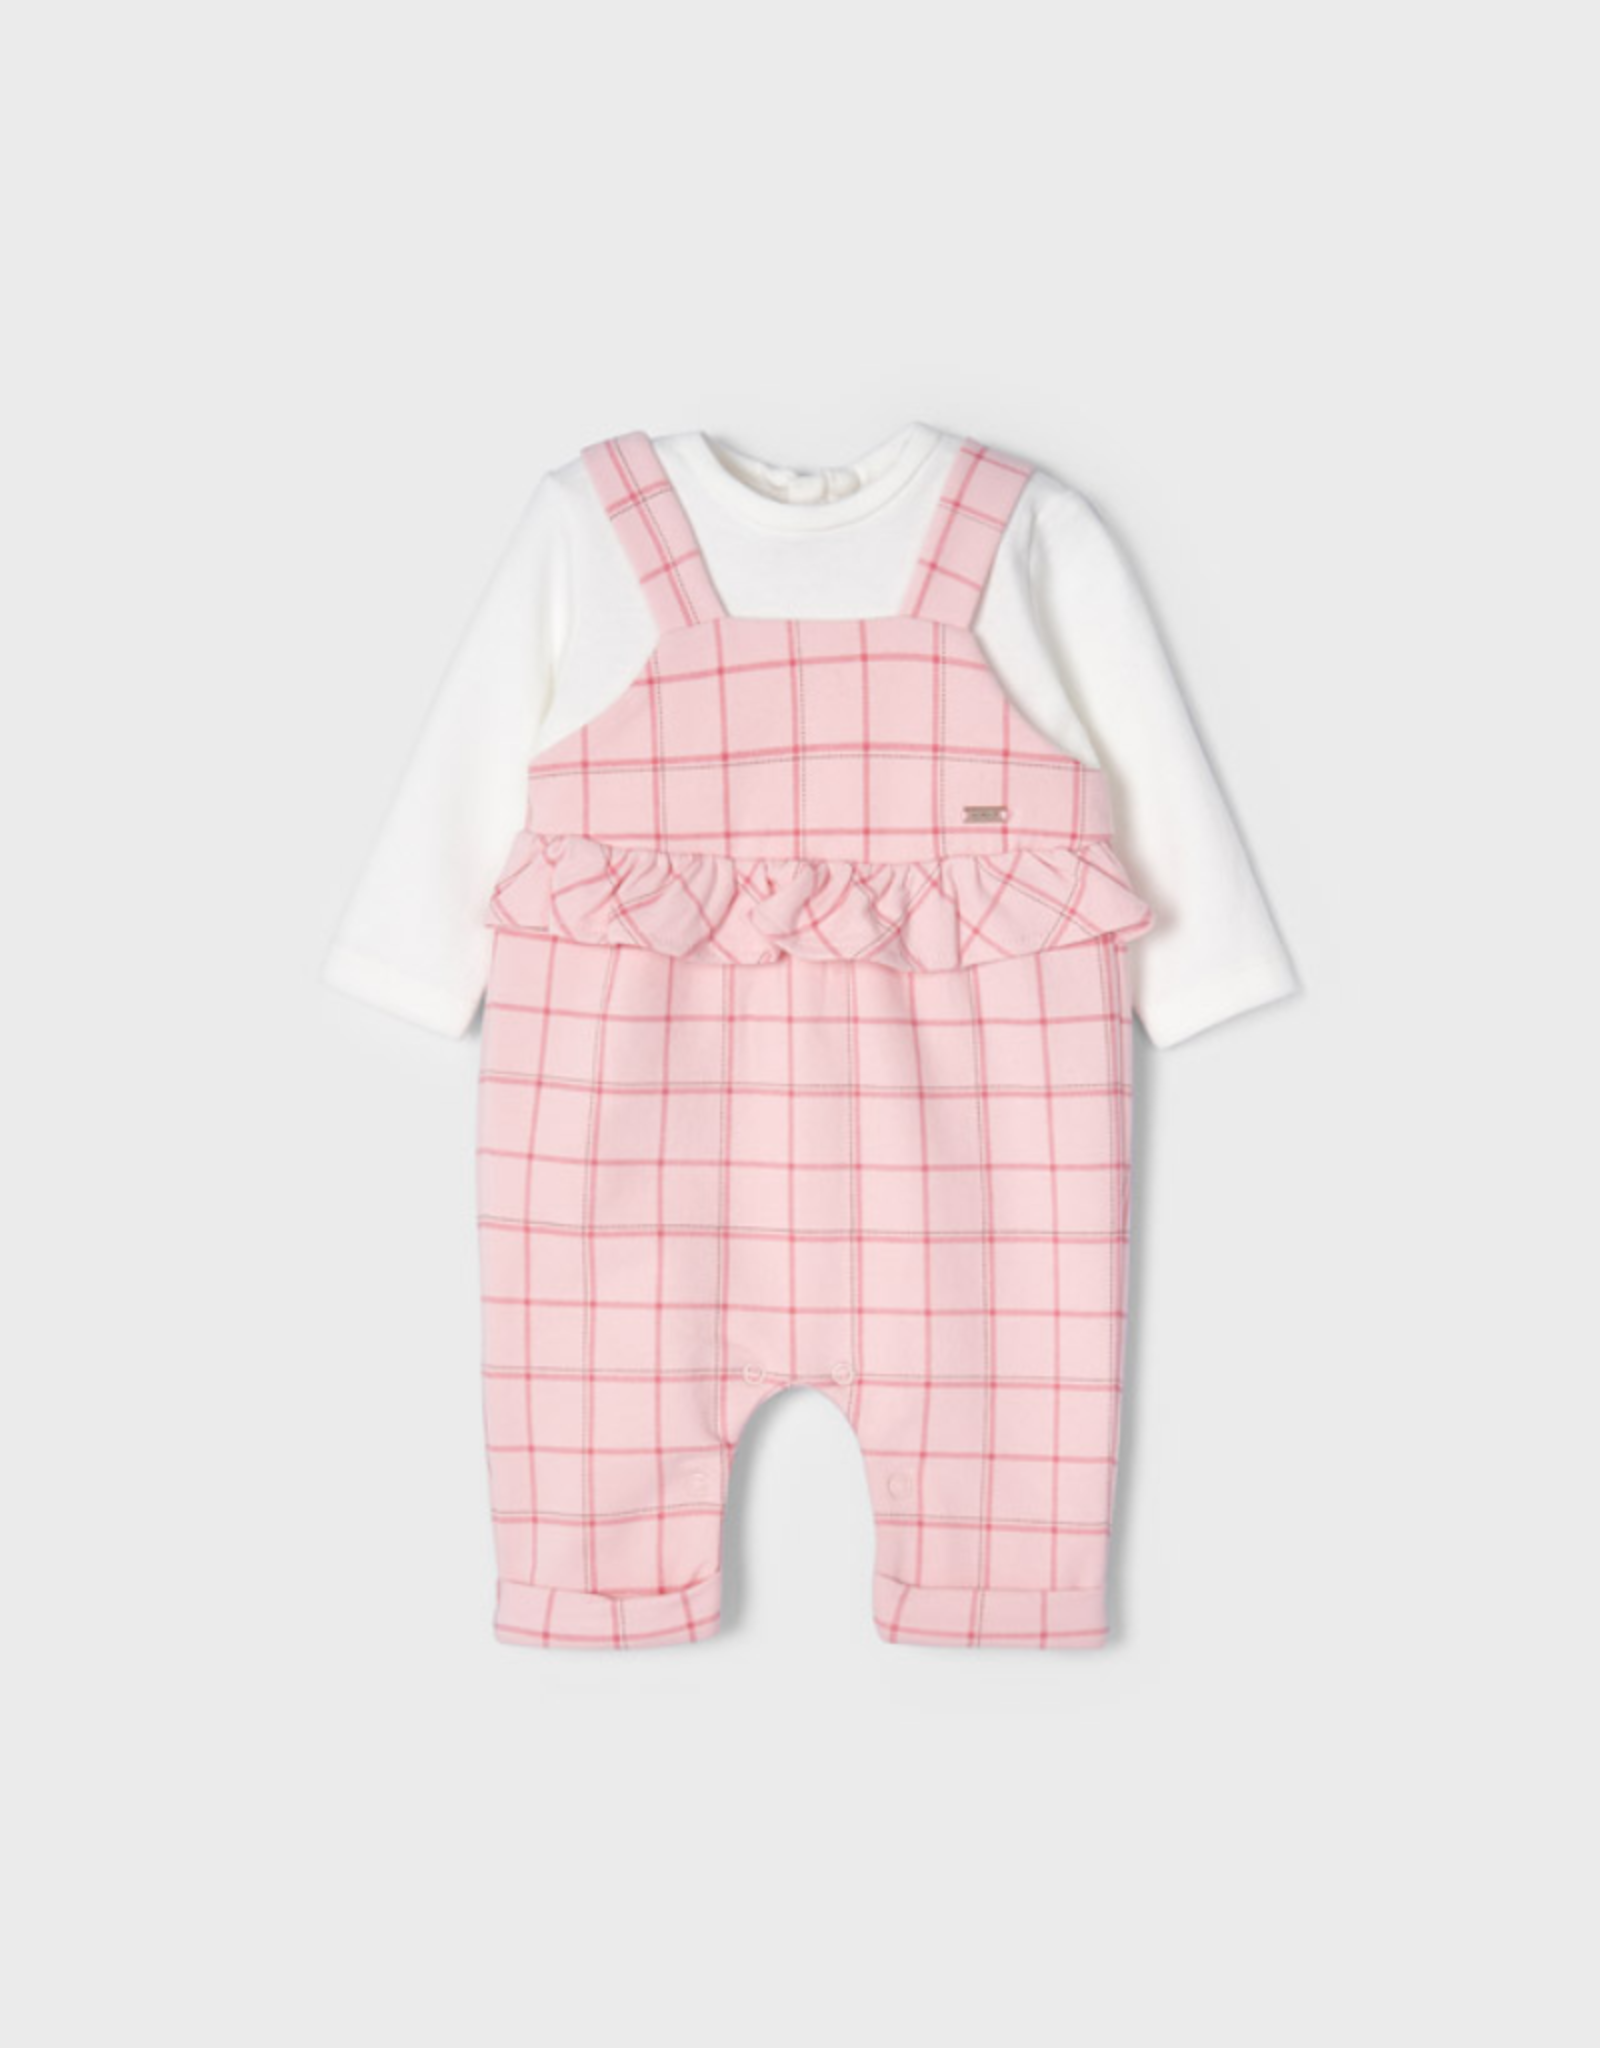 Mayoral Pink Knit Plaid Romper Set with Ruffle (2601)